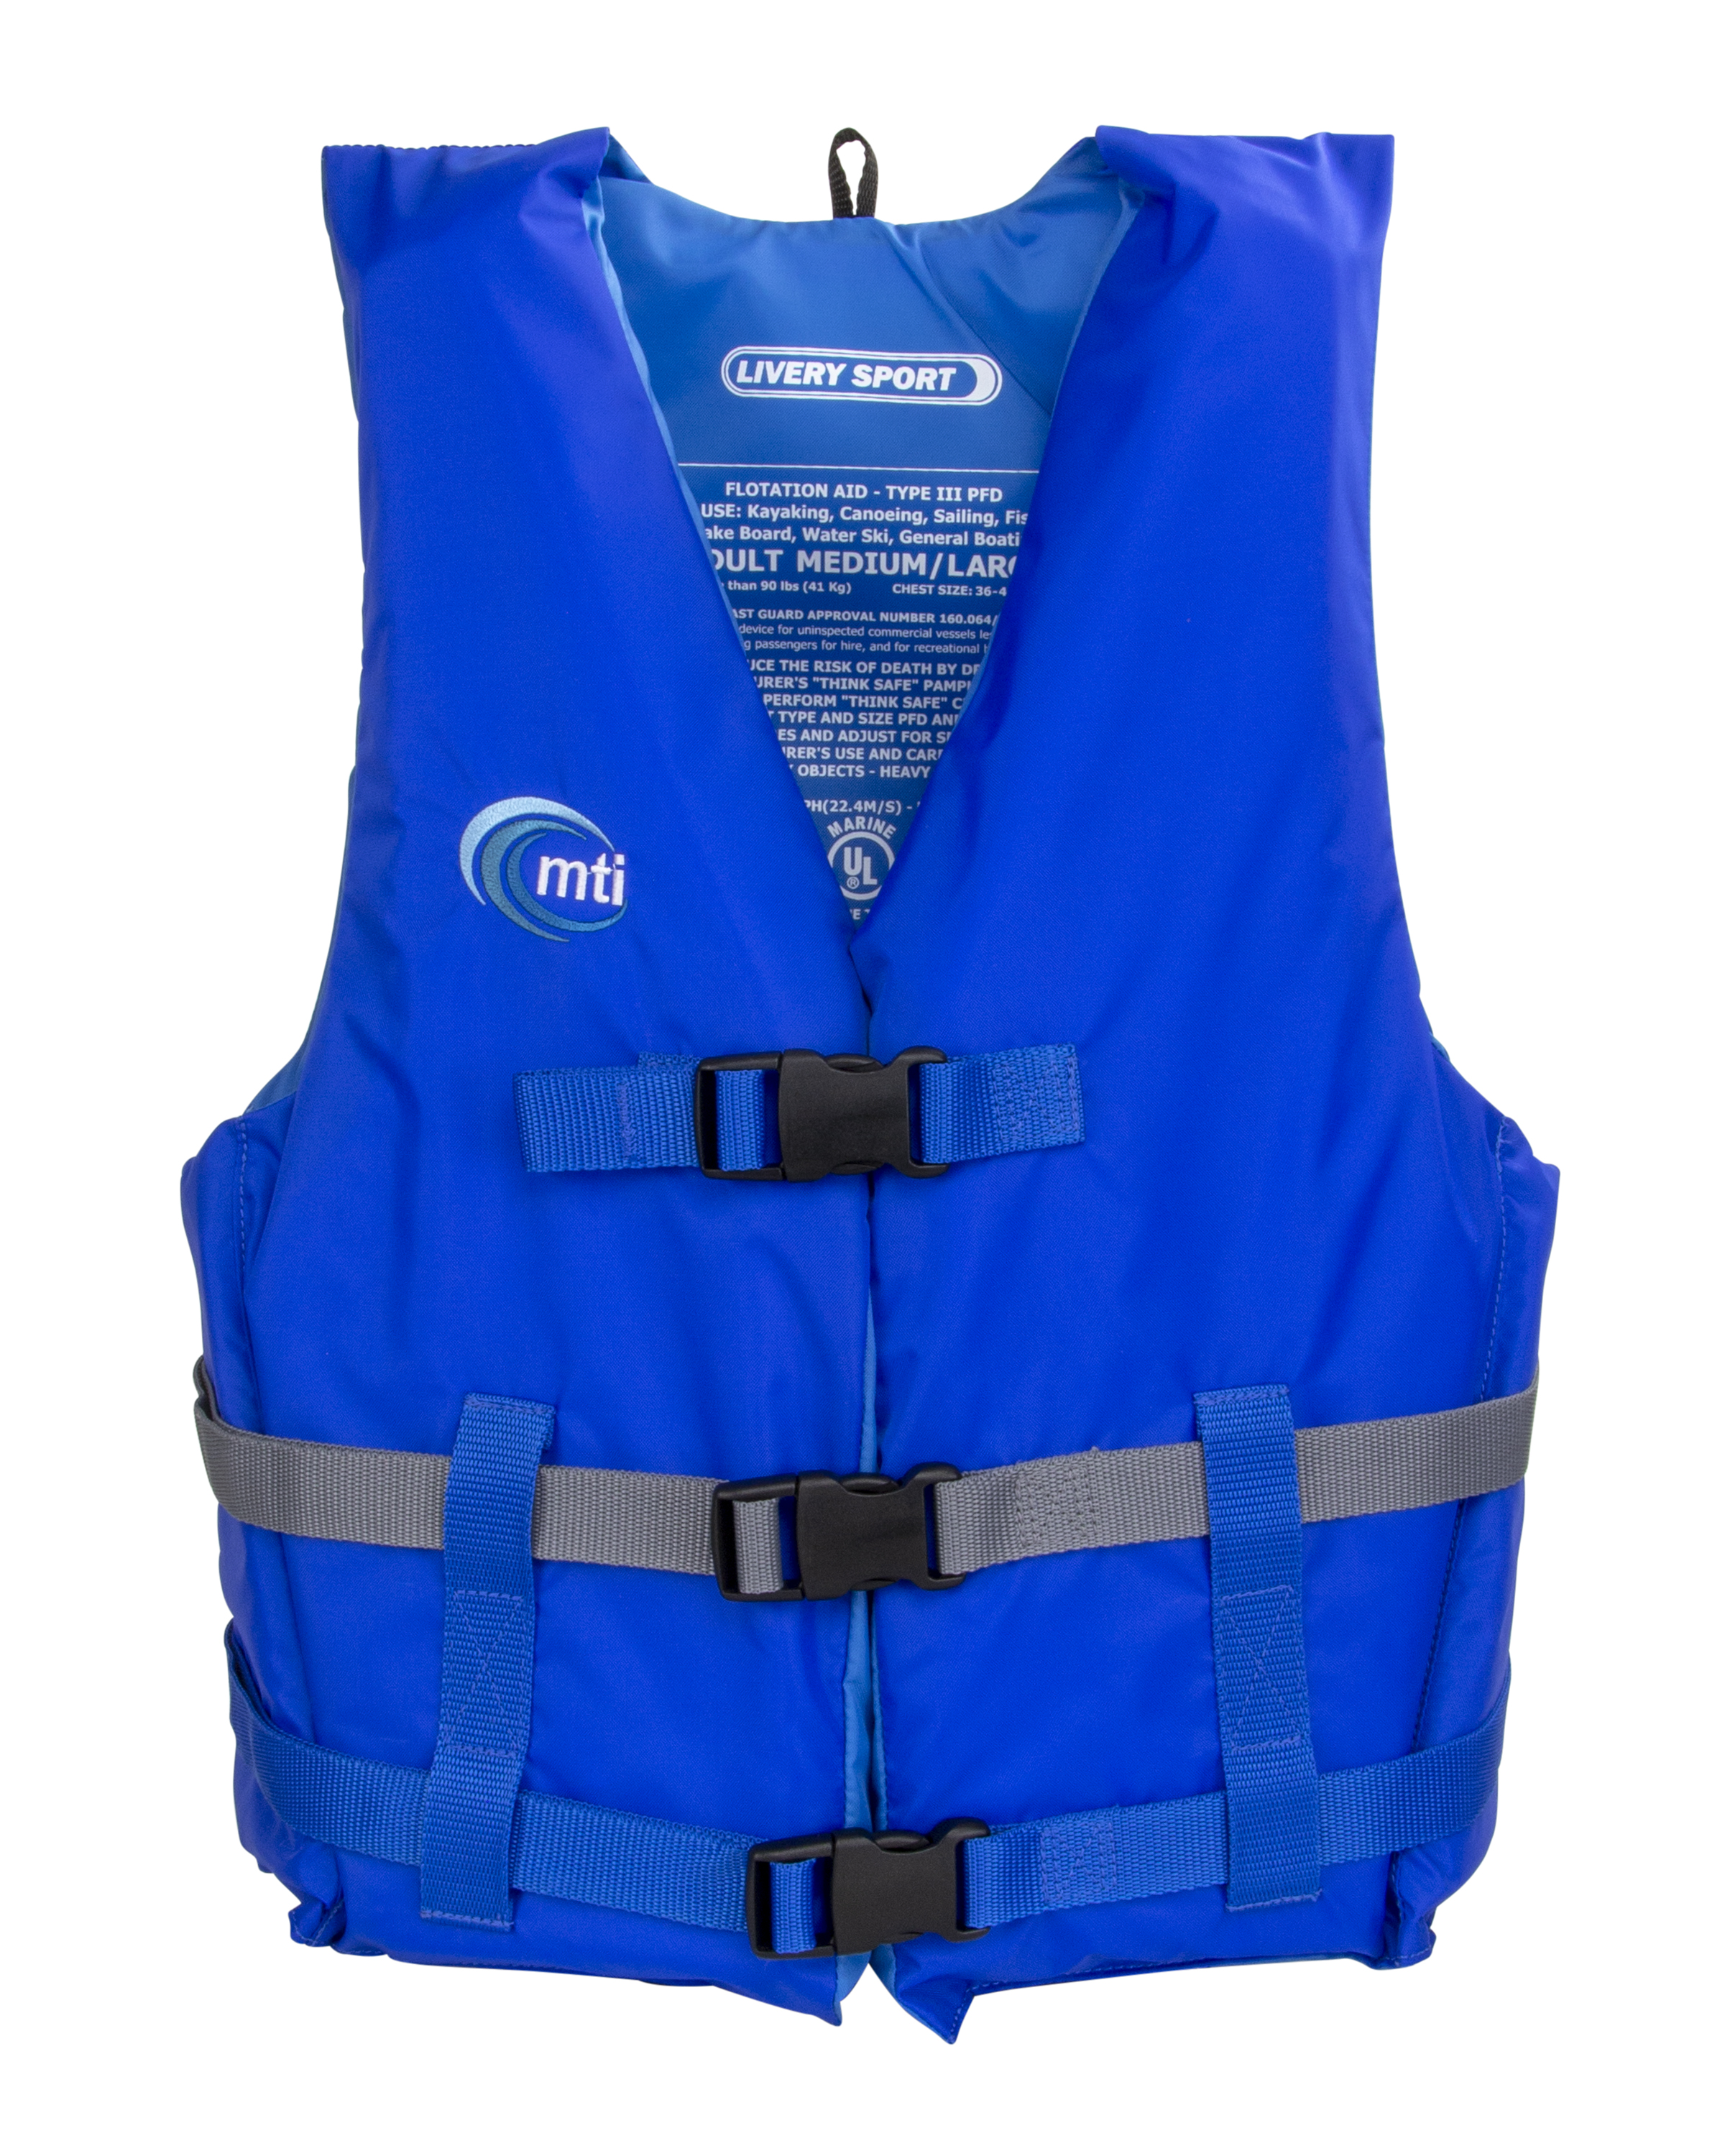 Life Jacket Livery Adult Type Iii By Mti Livery Life Vests By Mti Mti Life Jackets River Gear